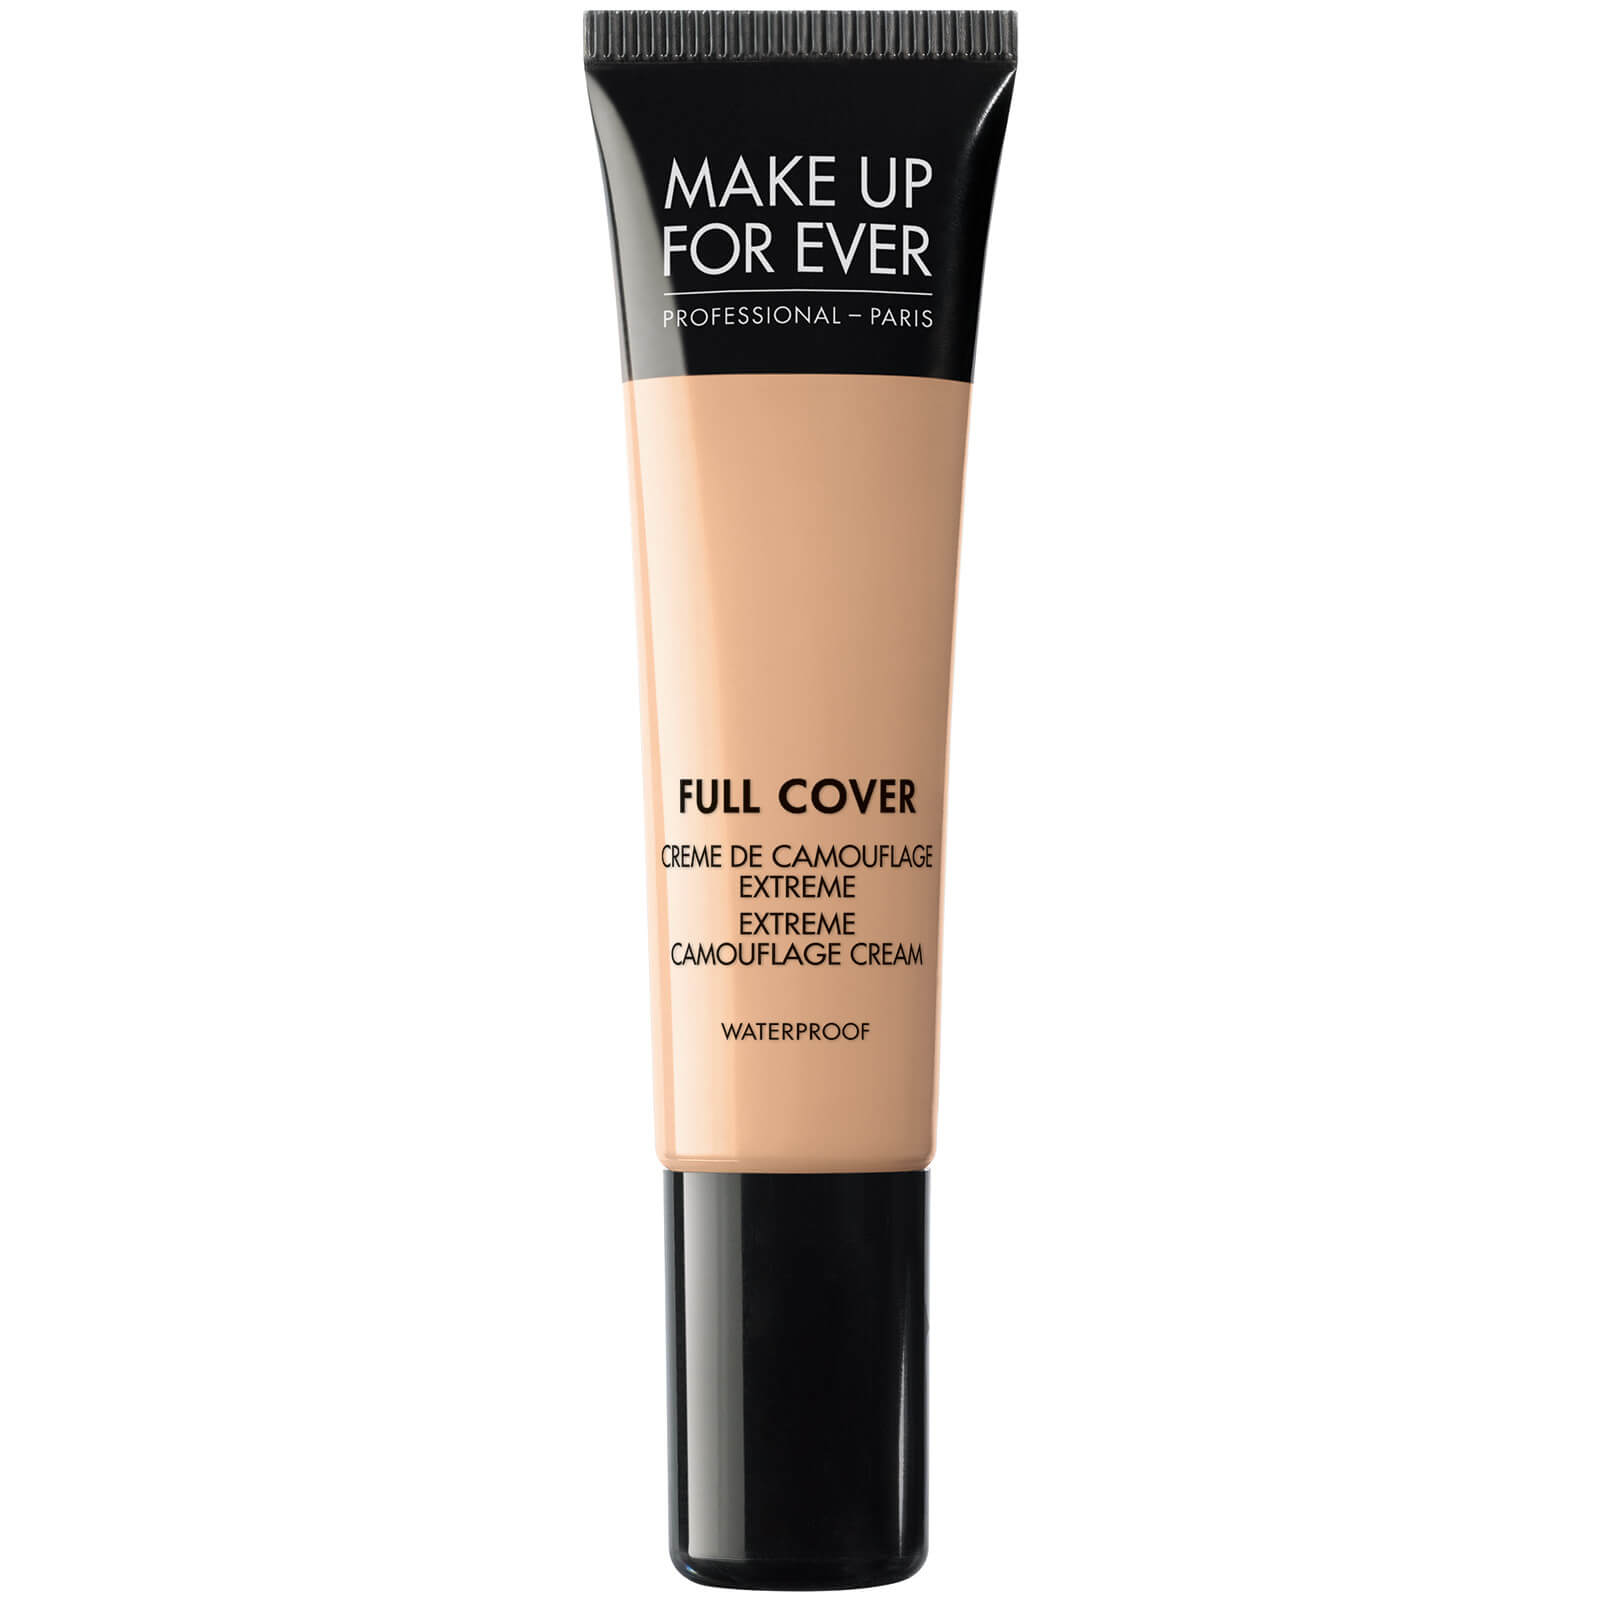 MAKE UP FOR EVER full Cover Concealer 15ml (Various Shades) - - 5-Vanilla